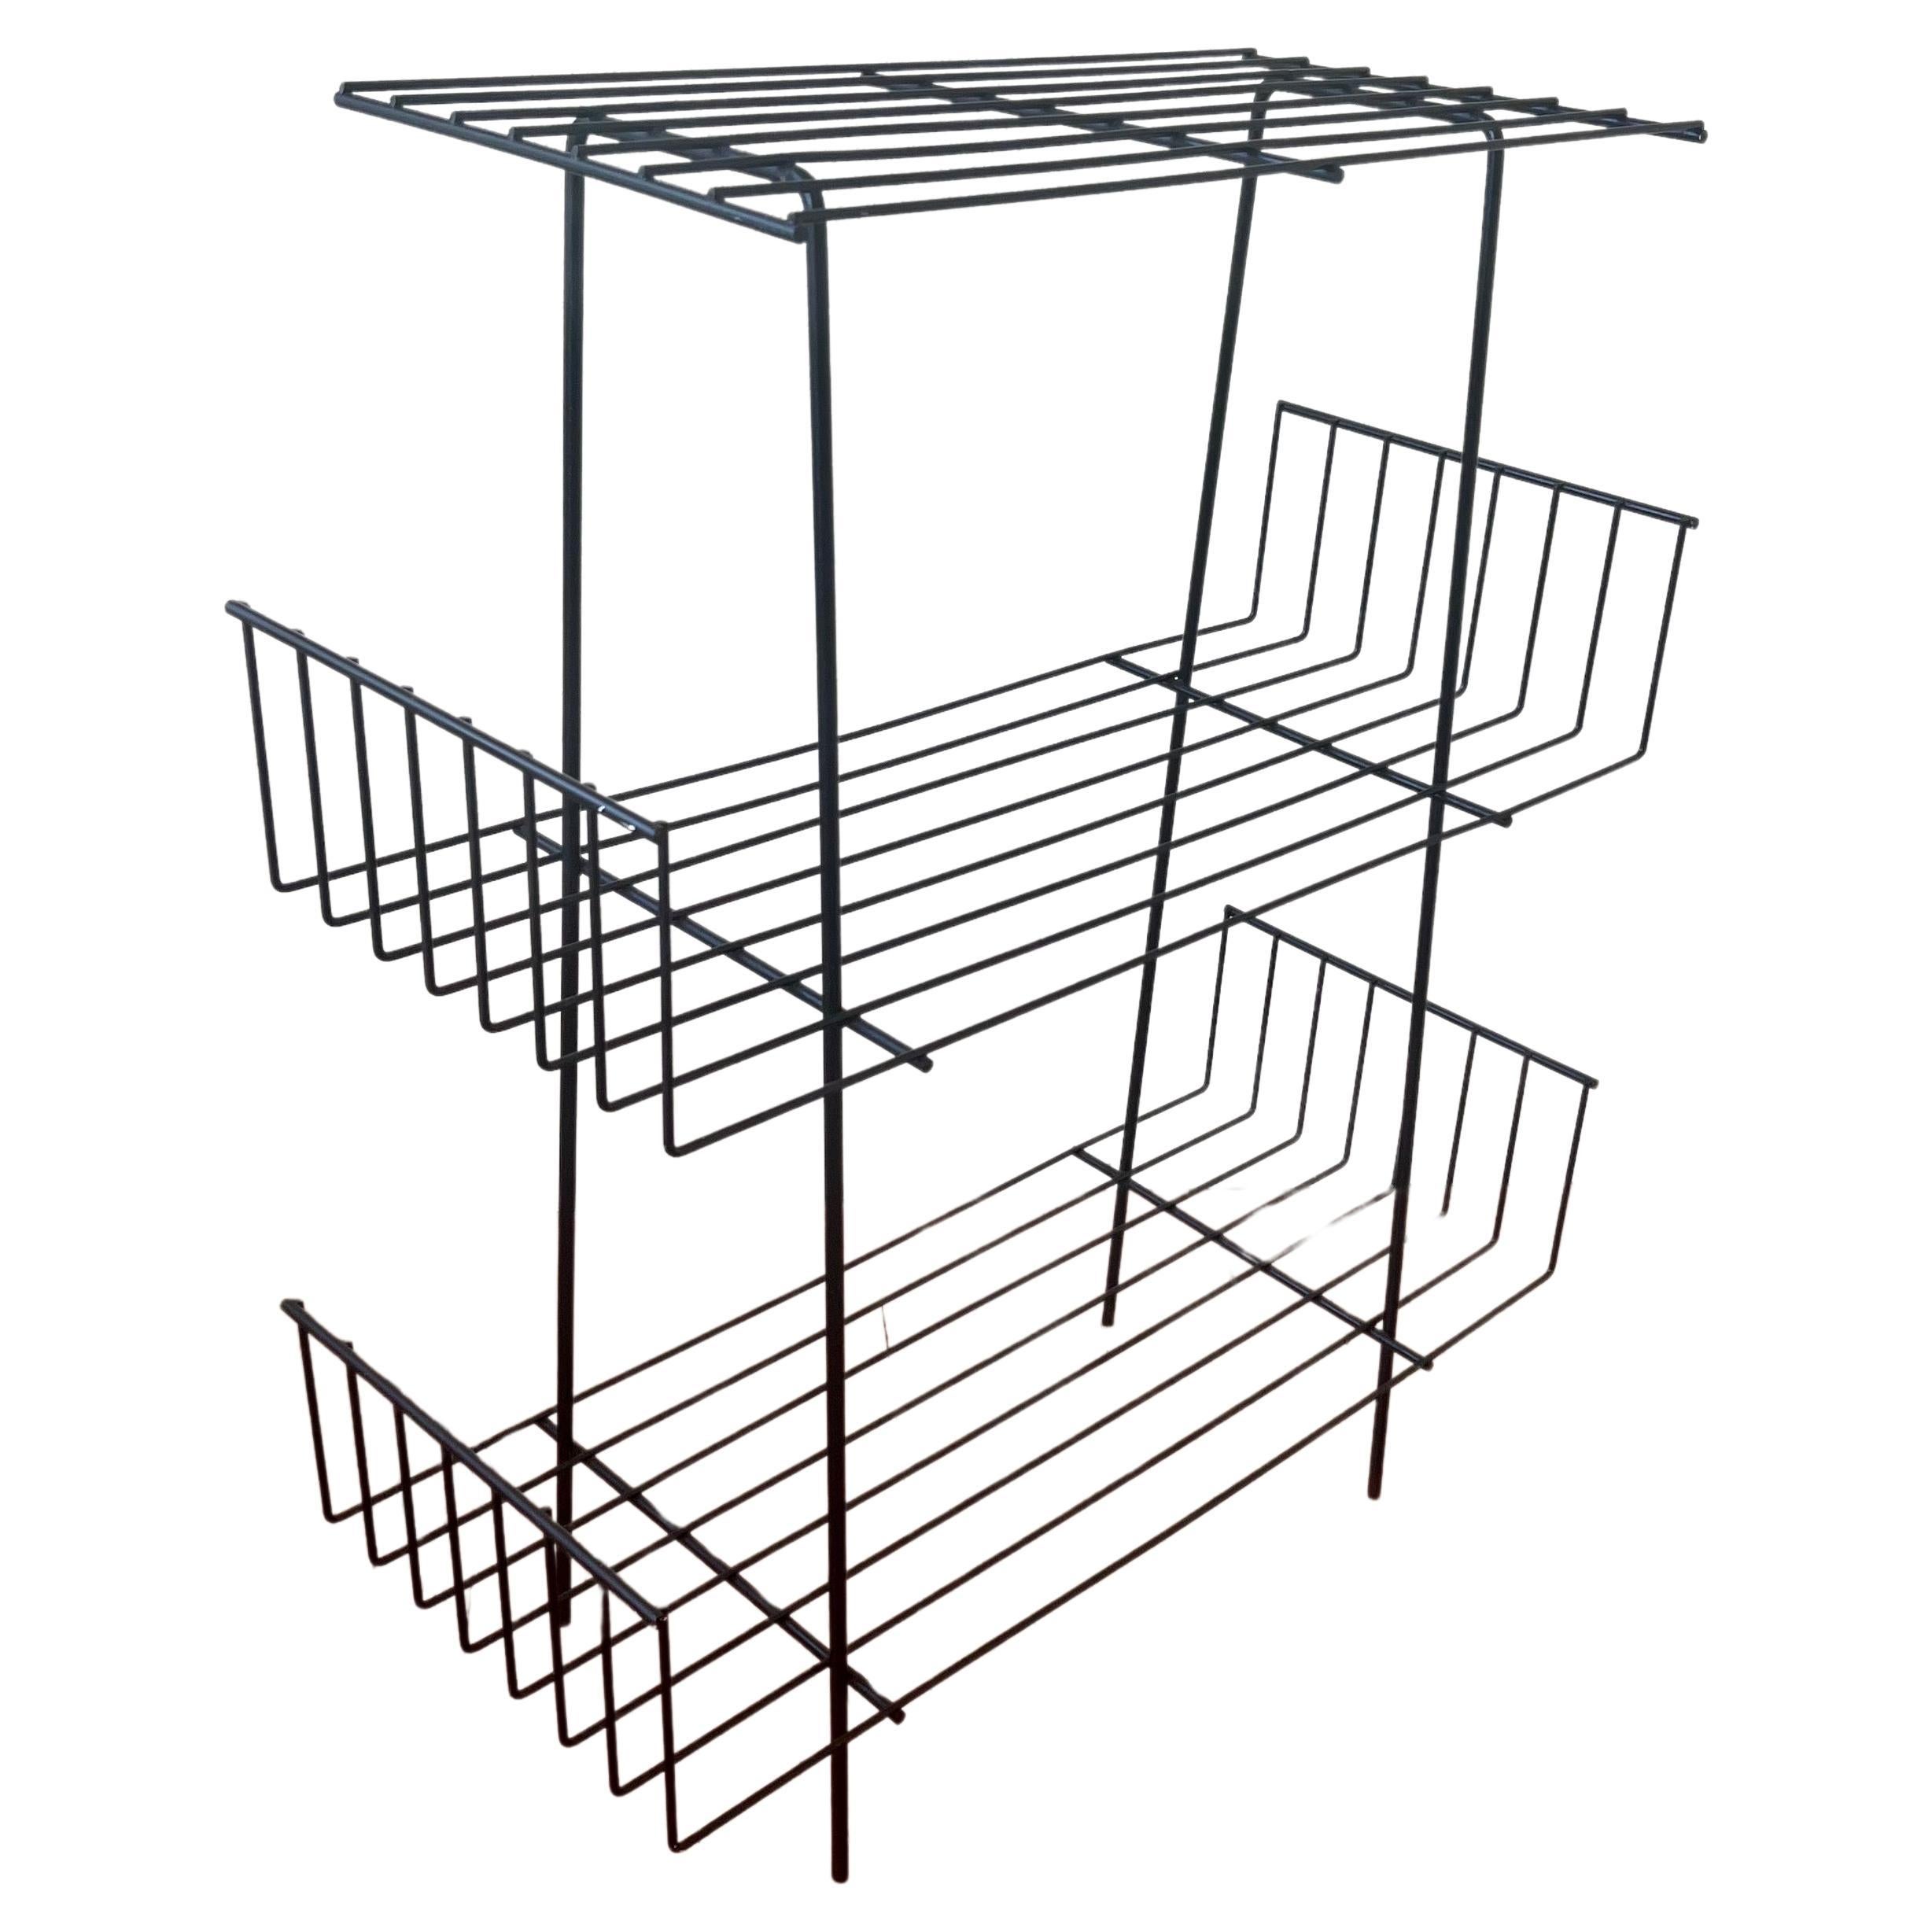 American mid century iron triple shelf stand /rack by Tony Paul.

Tony Paul studied at Brooklyn Polytechnic and majored in design at Pratt Institute. Before volunteering for Armed Service, he worked for five years on commercial and residential